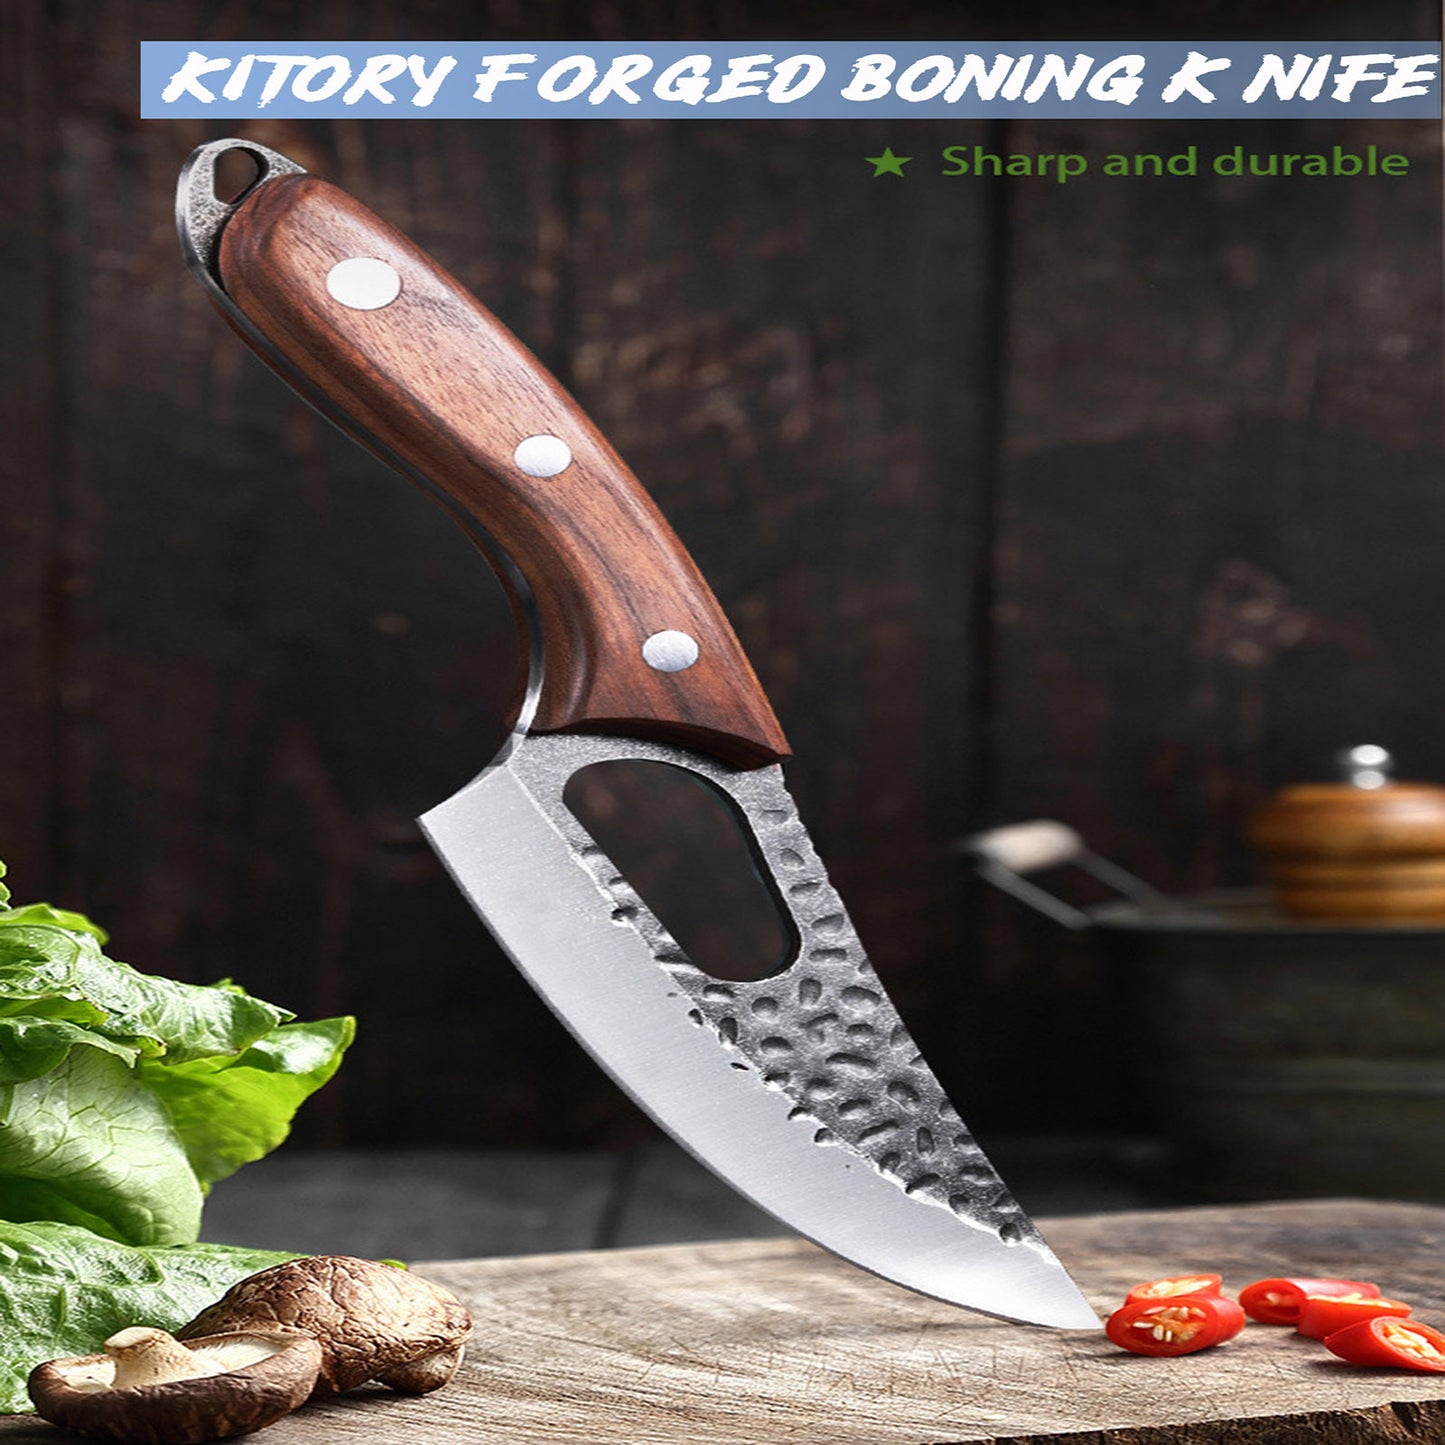 Kitory Viking Knife Forged Boning Knife Butcher Meat Cleaver 6 Inch